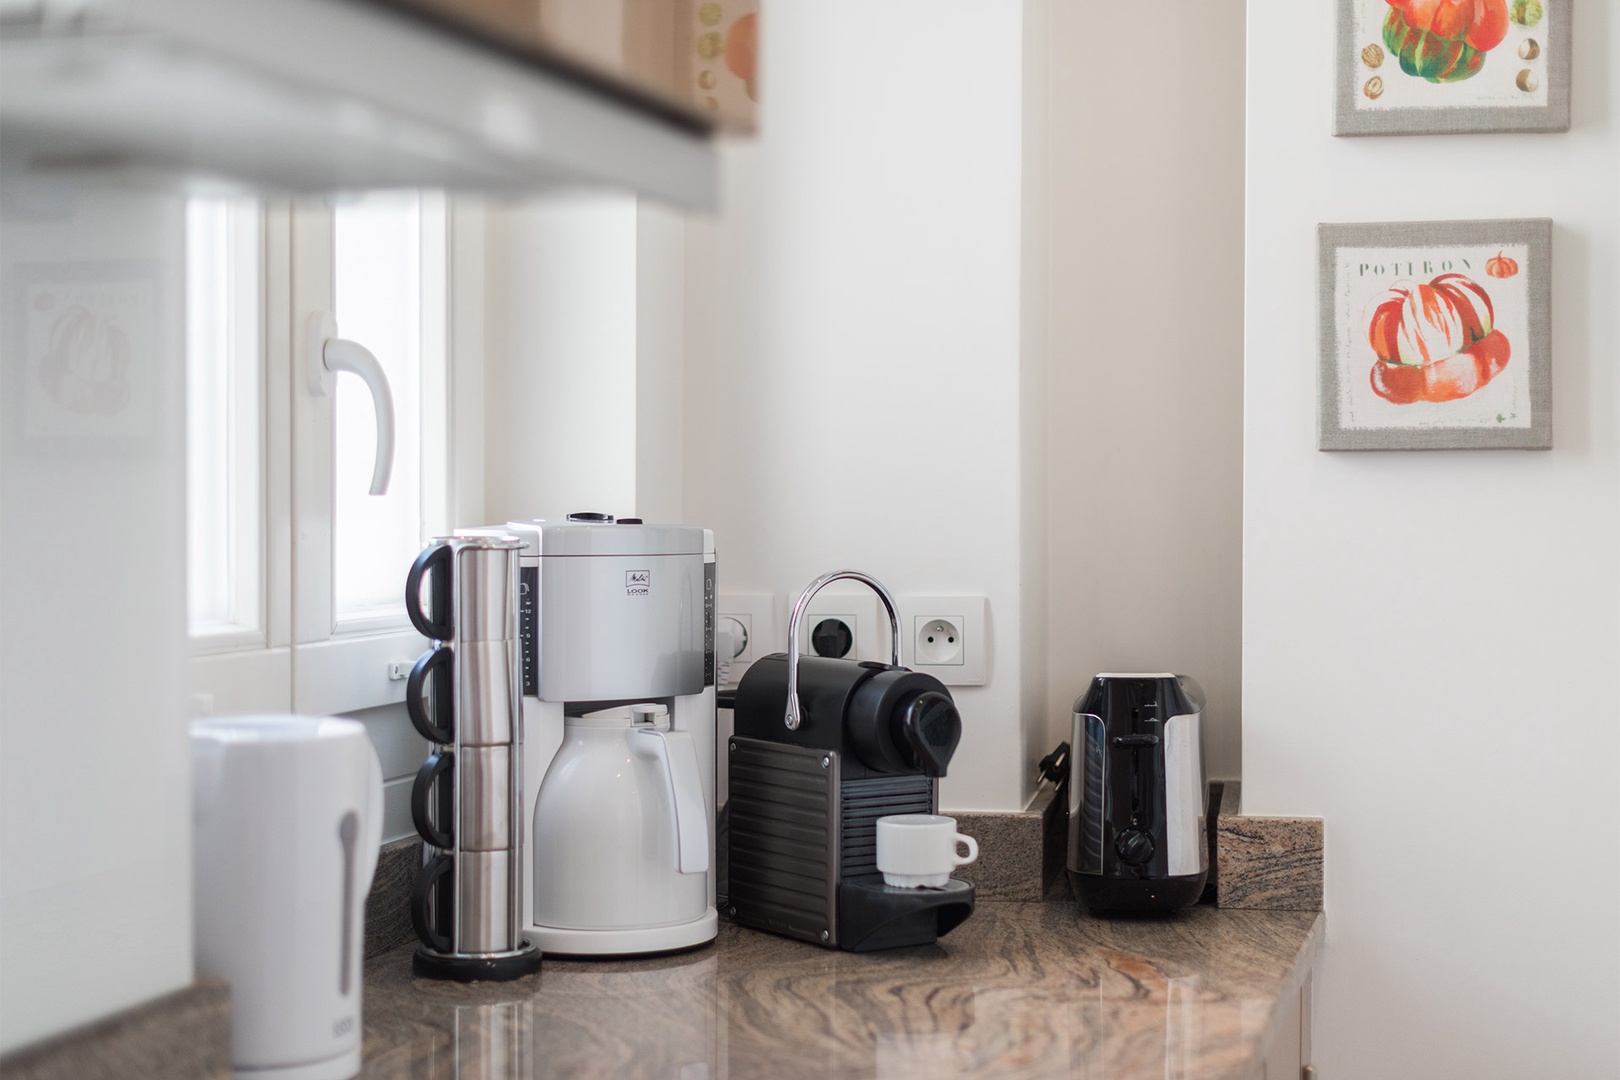 Start your day with a Nespresso at home.